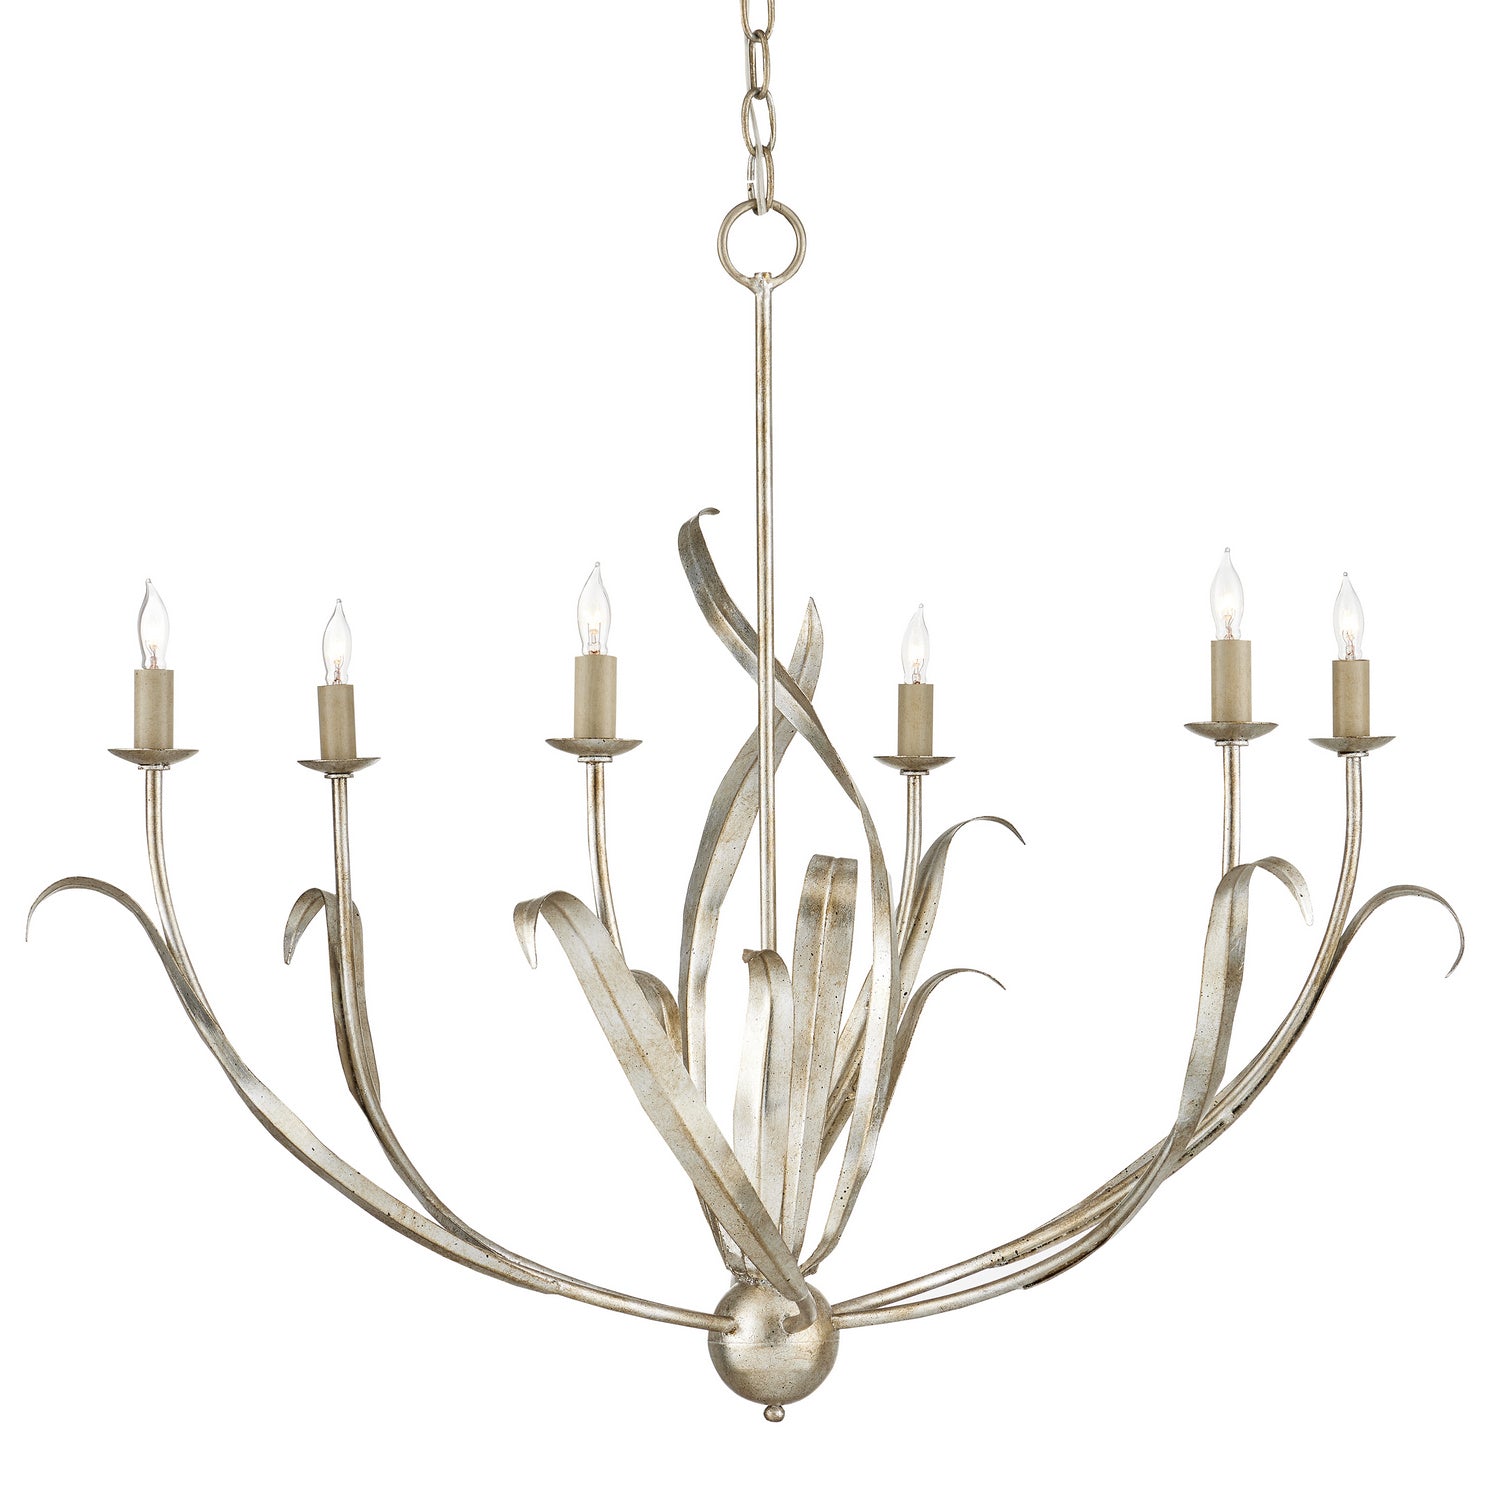 Six Light Chandelier from the Menefee collection in Silver Granello finish